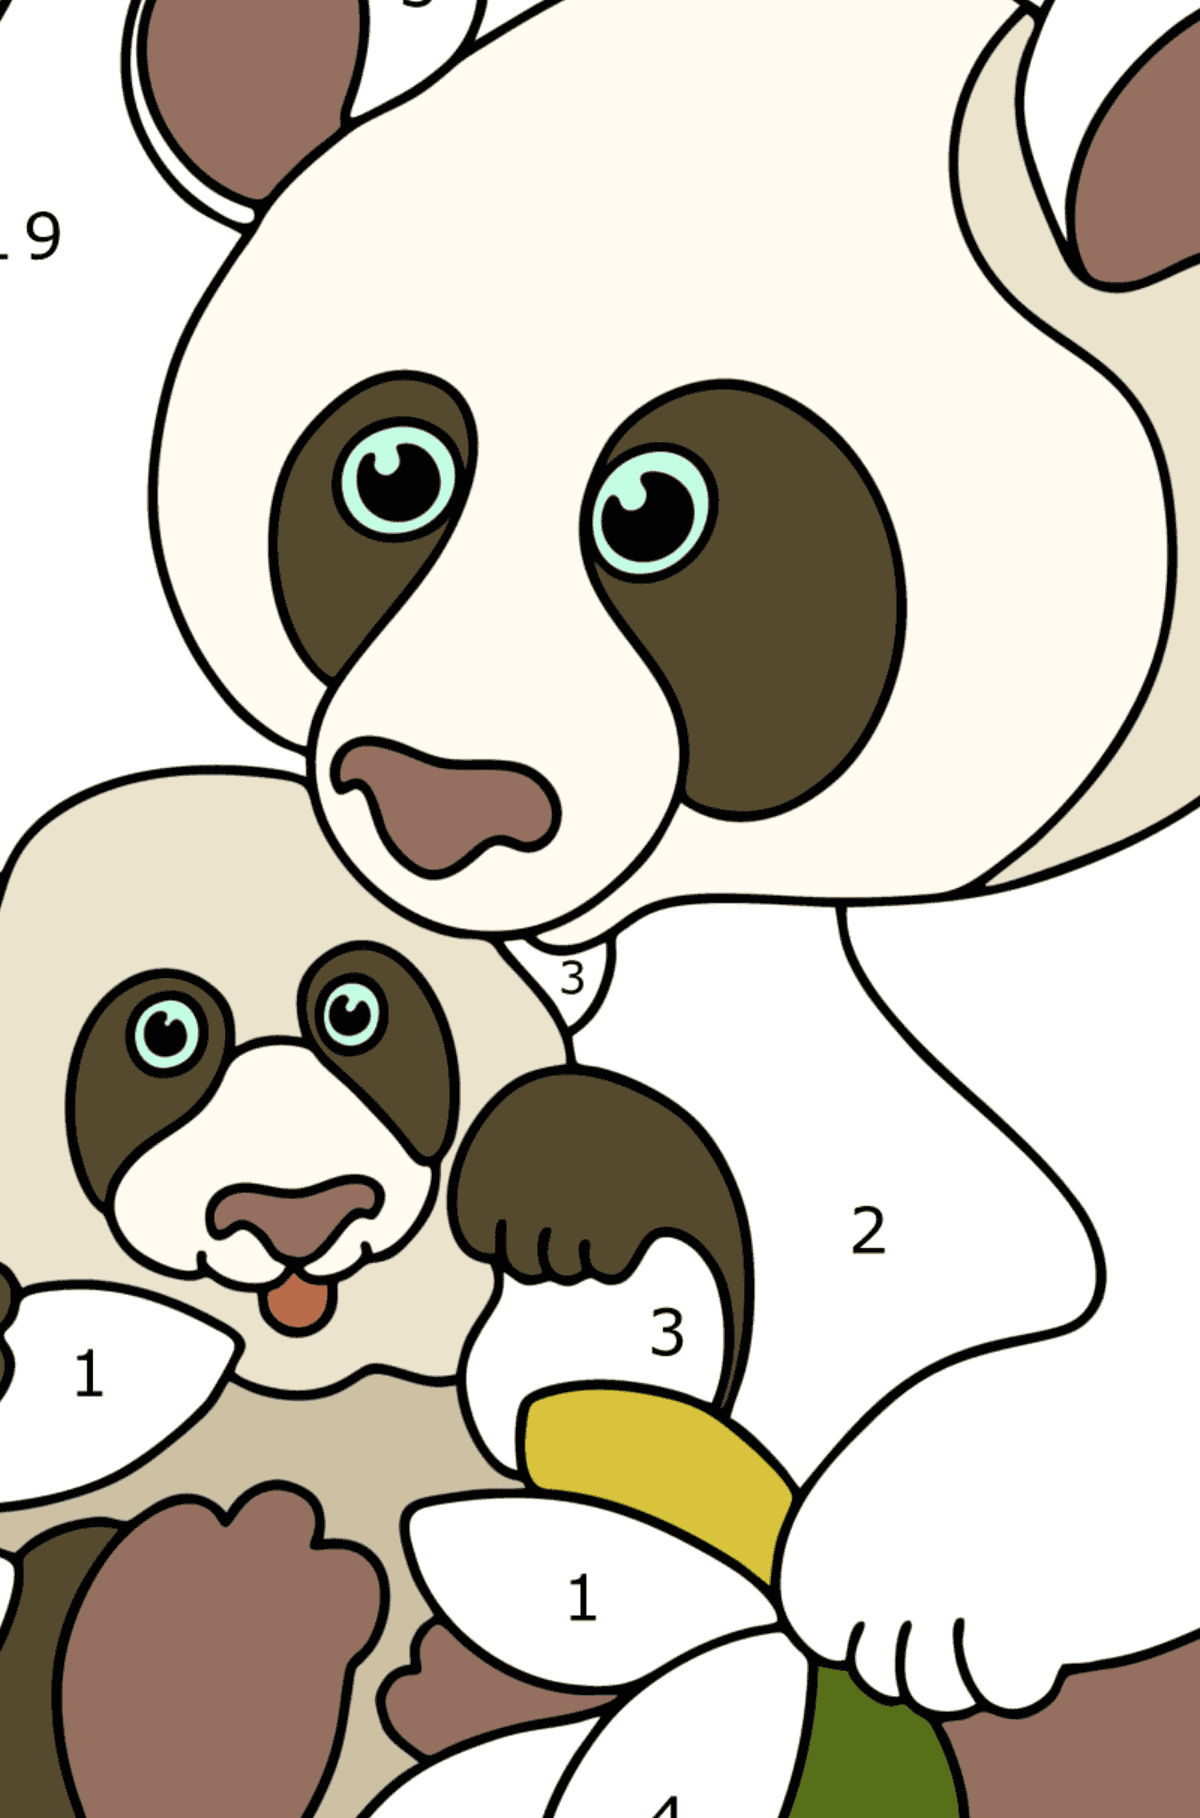 Giant panda with a cub coloring page - Coloring by Numbers for Kids